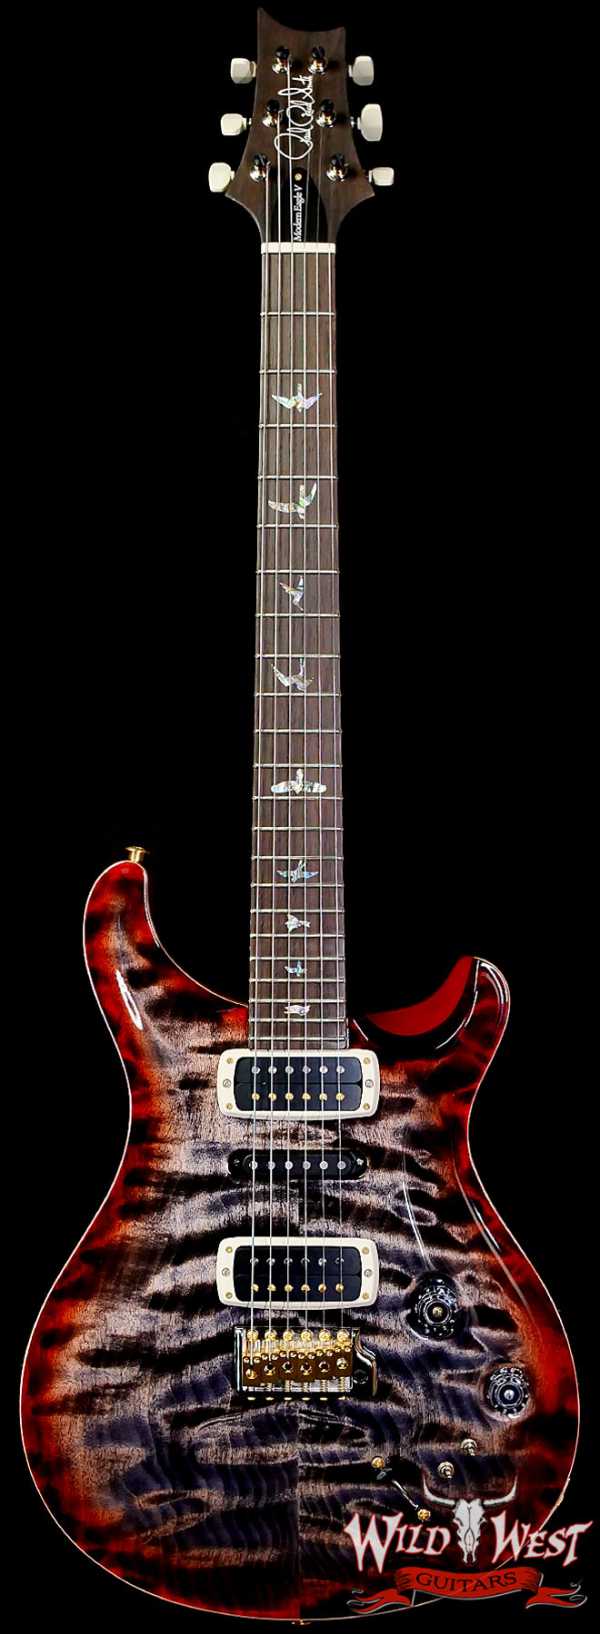 Paul Reed Smith PRS Wood Library 10 Top Quilt Modern Eagle V ME5 Flame Maple Neck Brazilian Rosewood Board Charcoal Cherry Burst 8.30 LBS (US Only / No International Shipping)